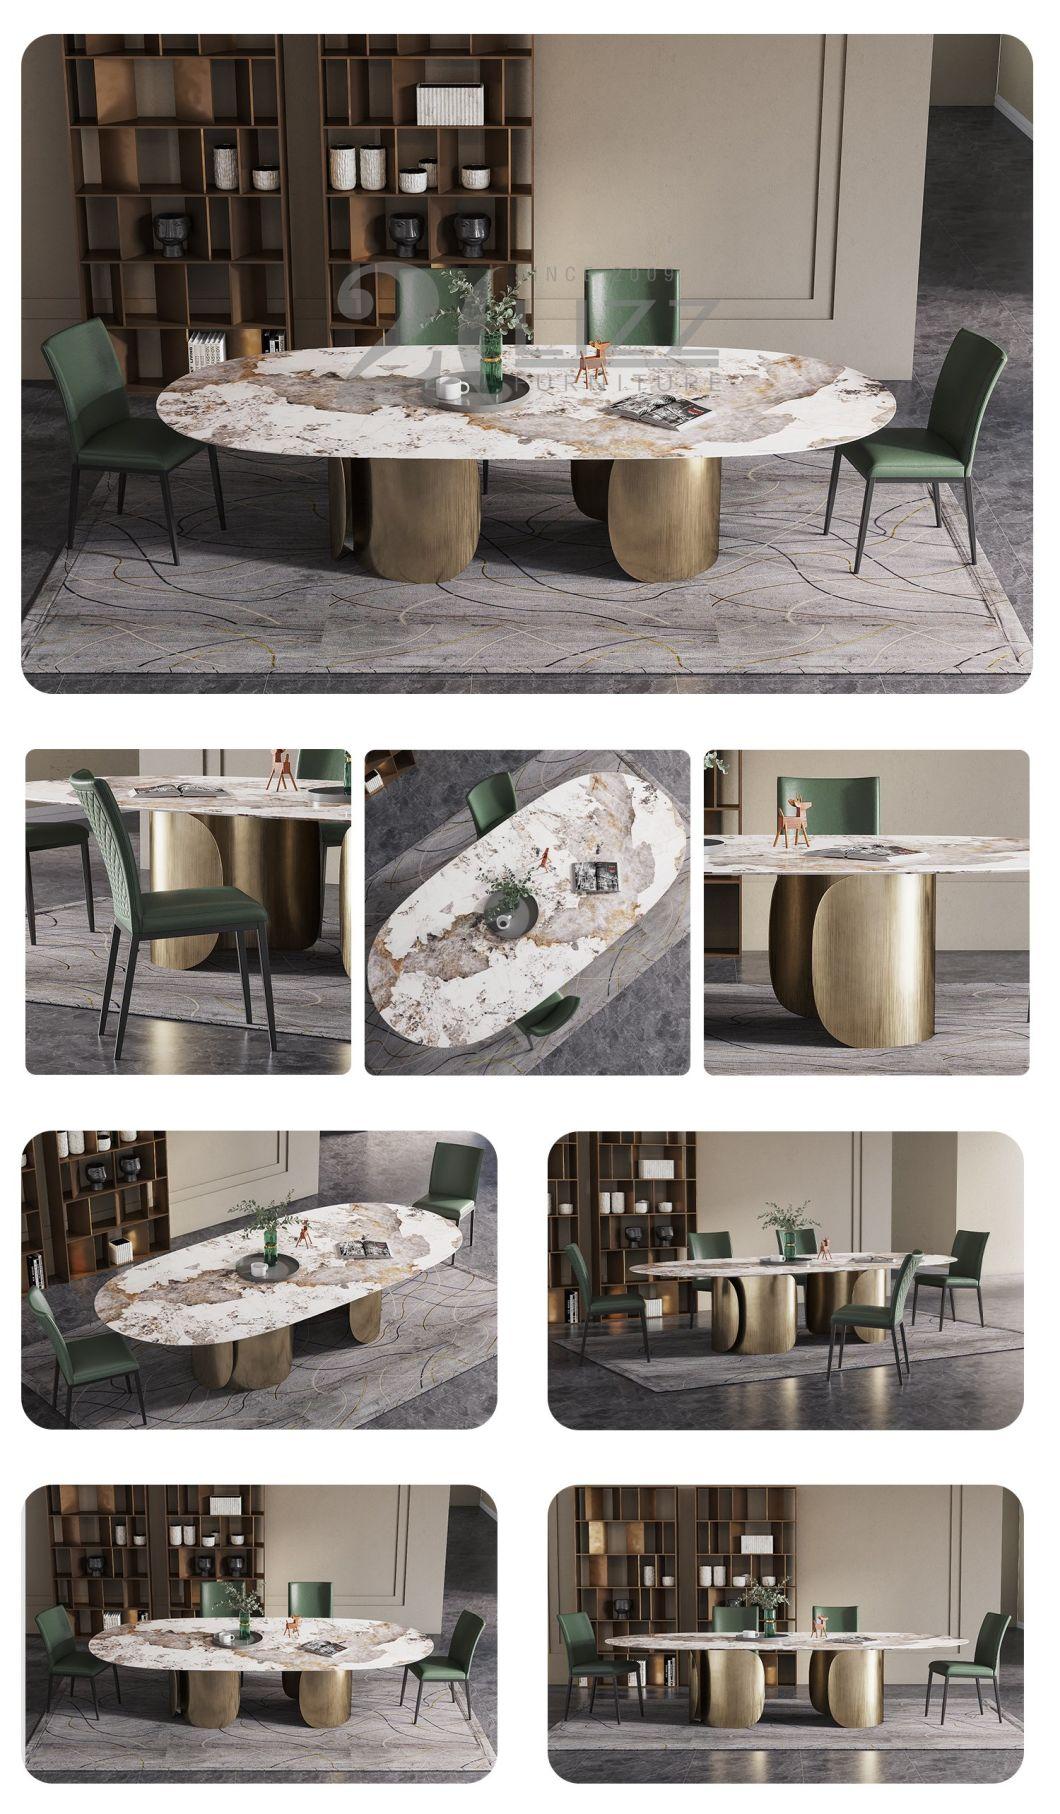 Oval Luxury Italian Design Dining Room Table Home Furniture Set 6 to 8 Seater Chairs with Marble Top